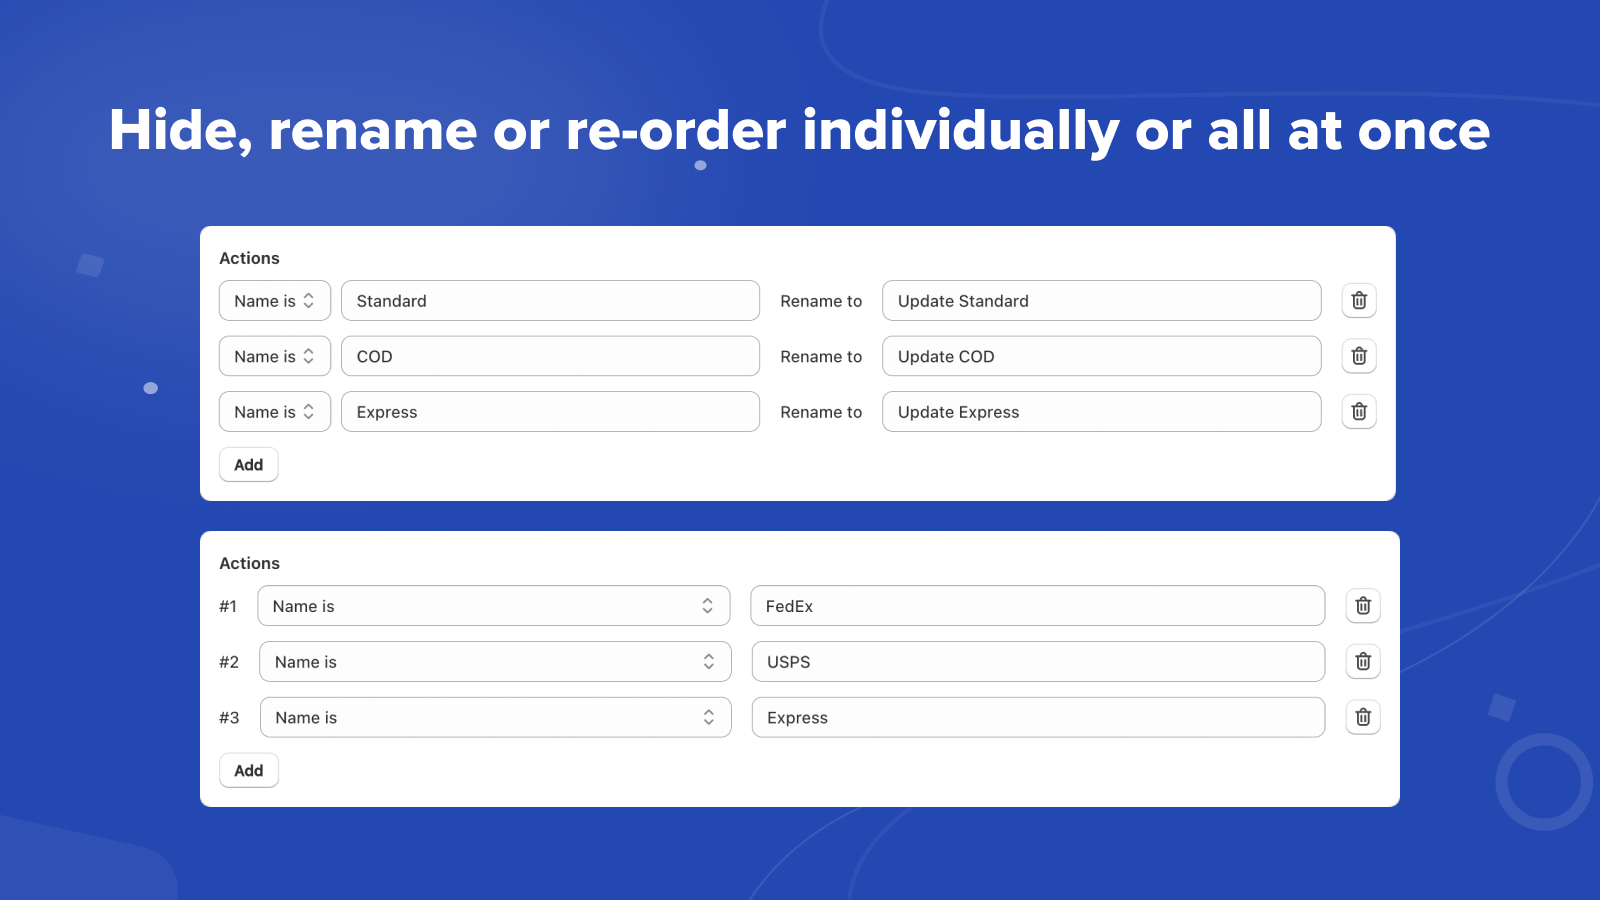 Hide, rename or re-order individually or all at once